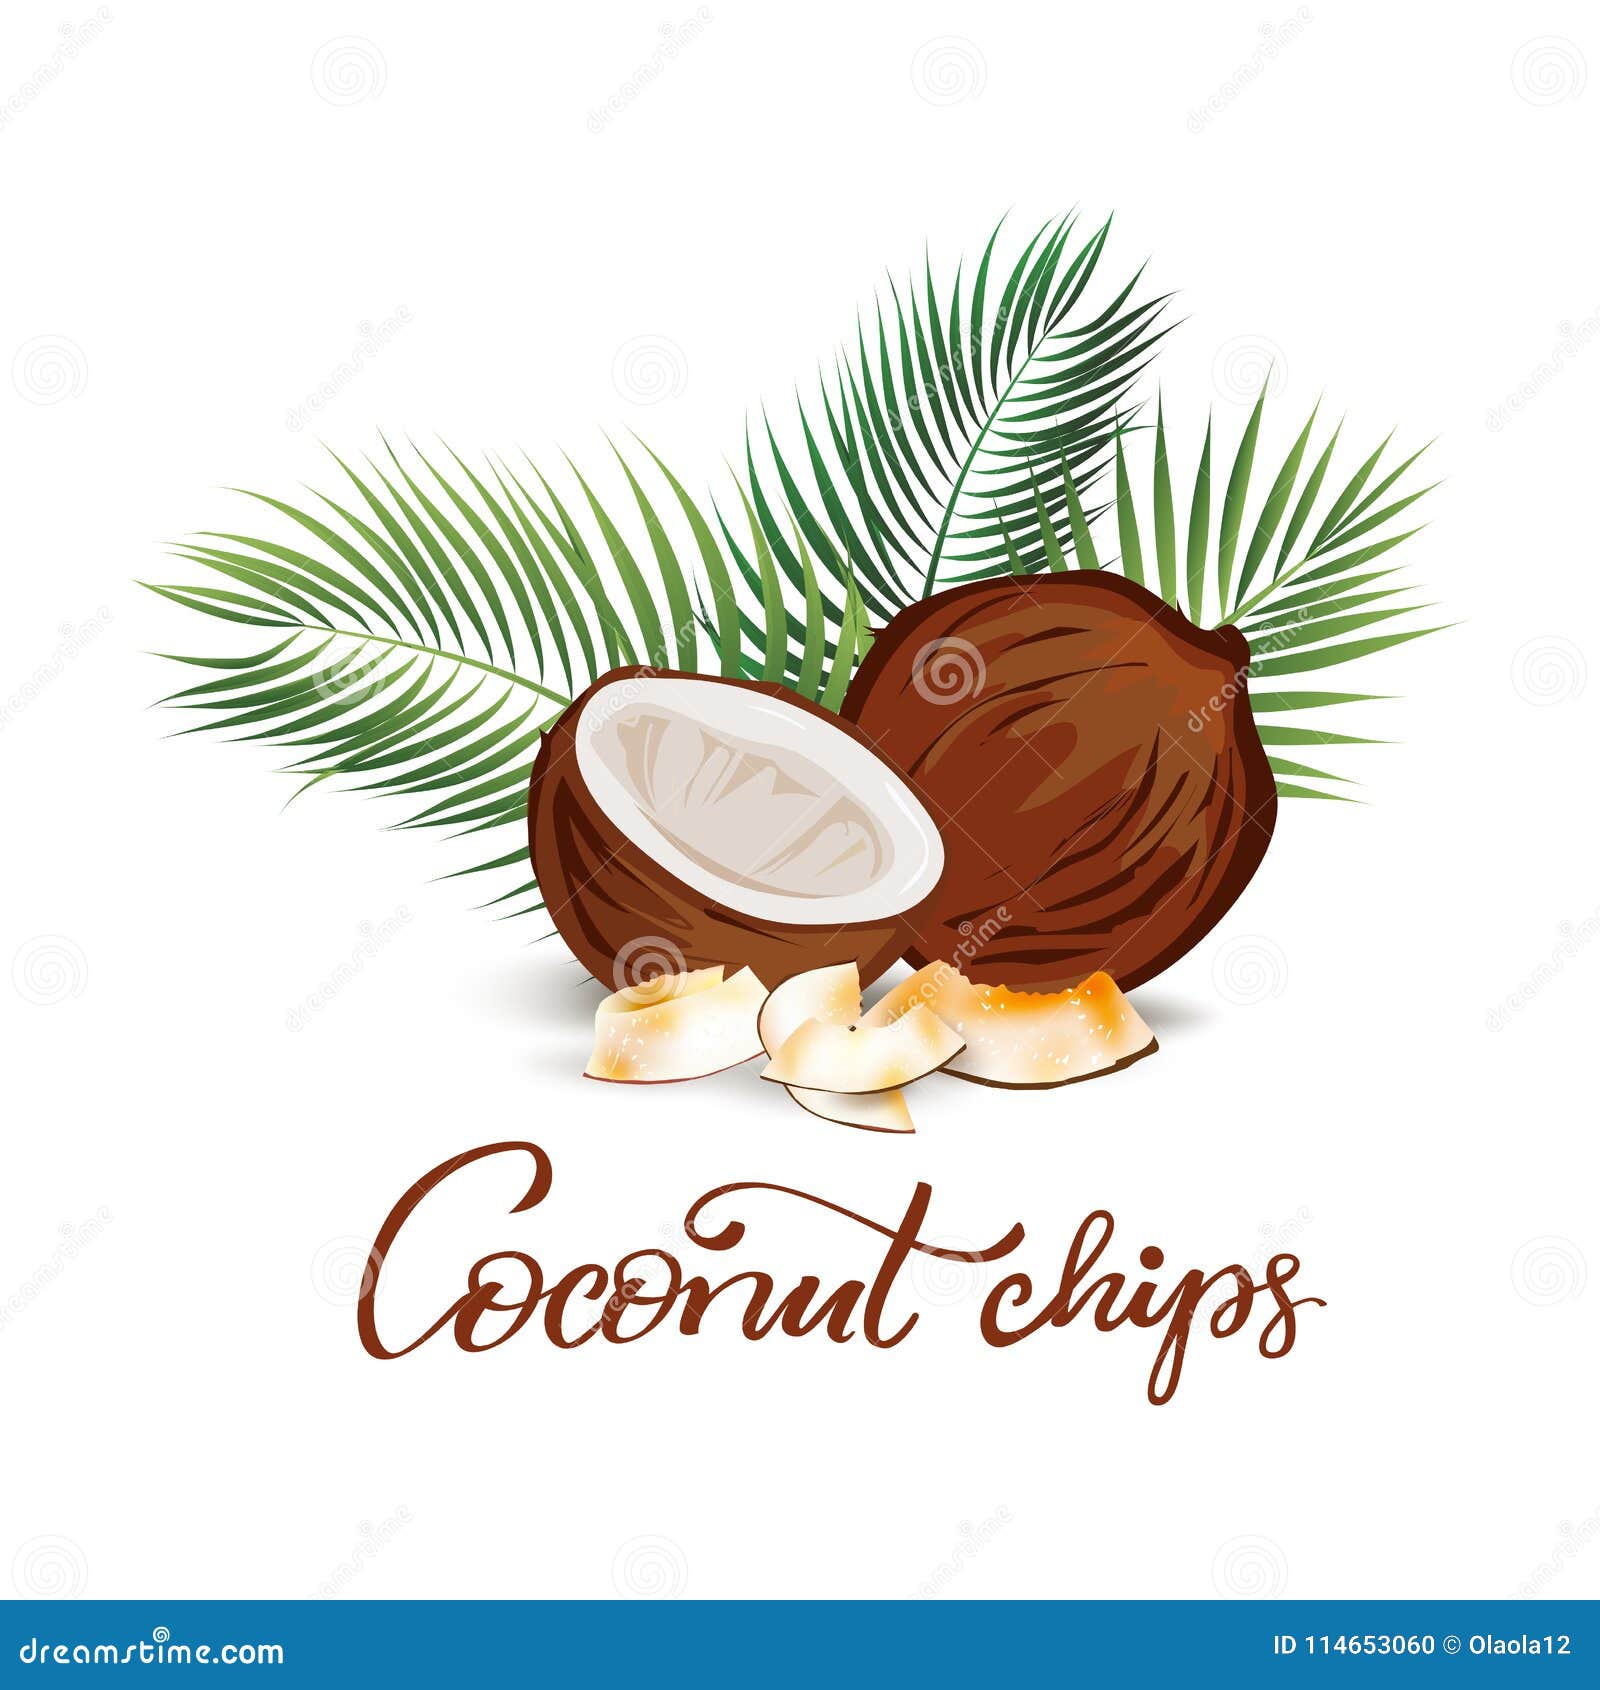 Coconut and Palm Leaves Illustration Stock Vector - Illustration of ...